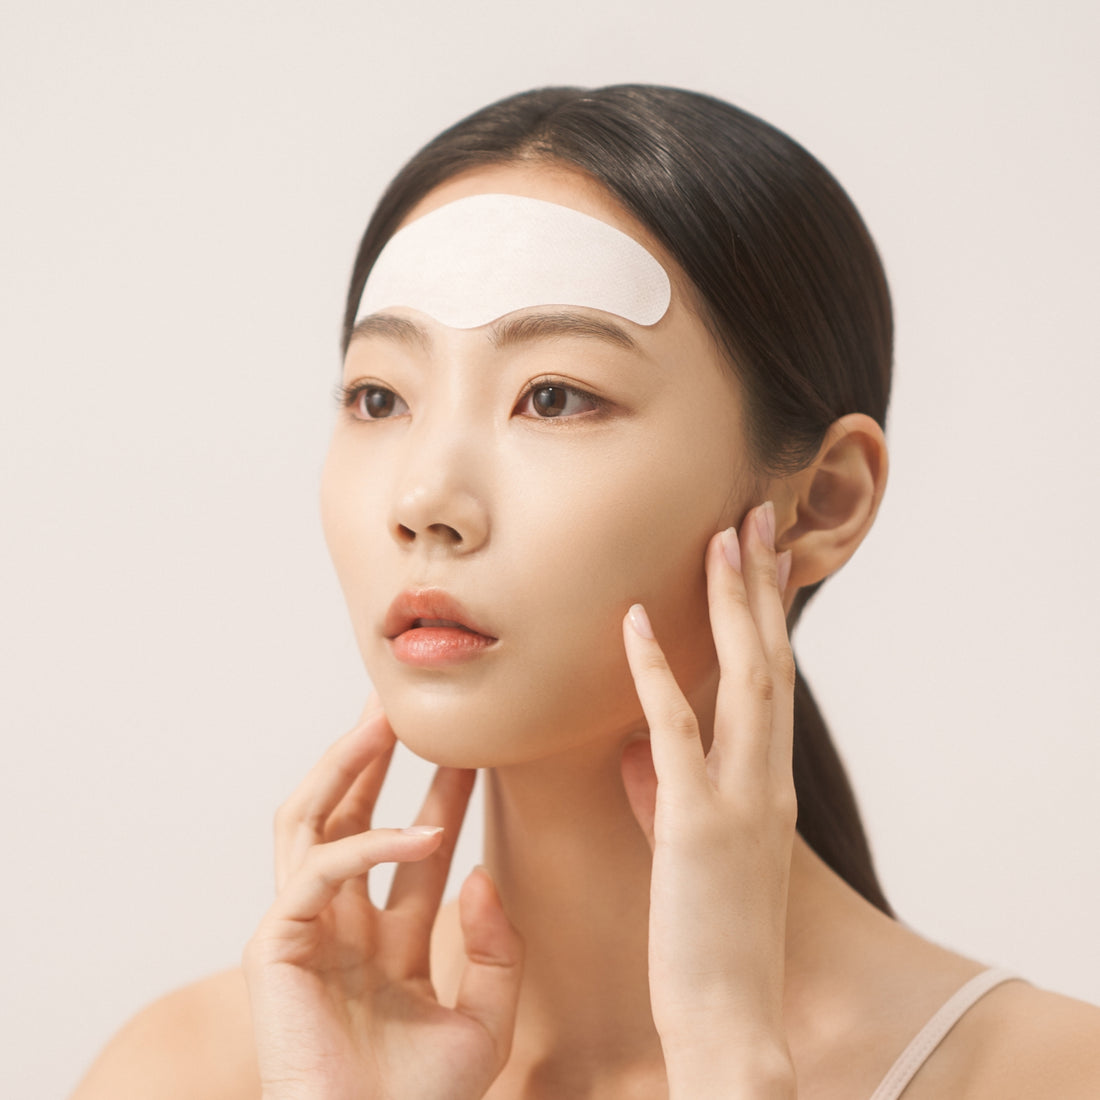 Vitalique Collagen Melting Patch for Forehead